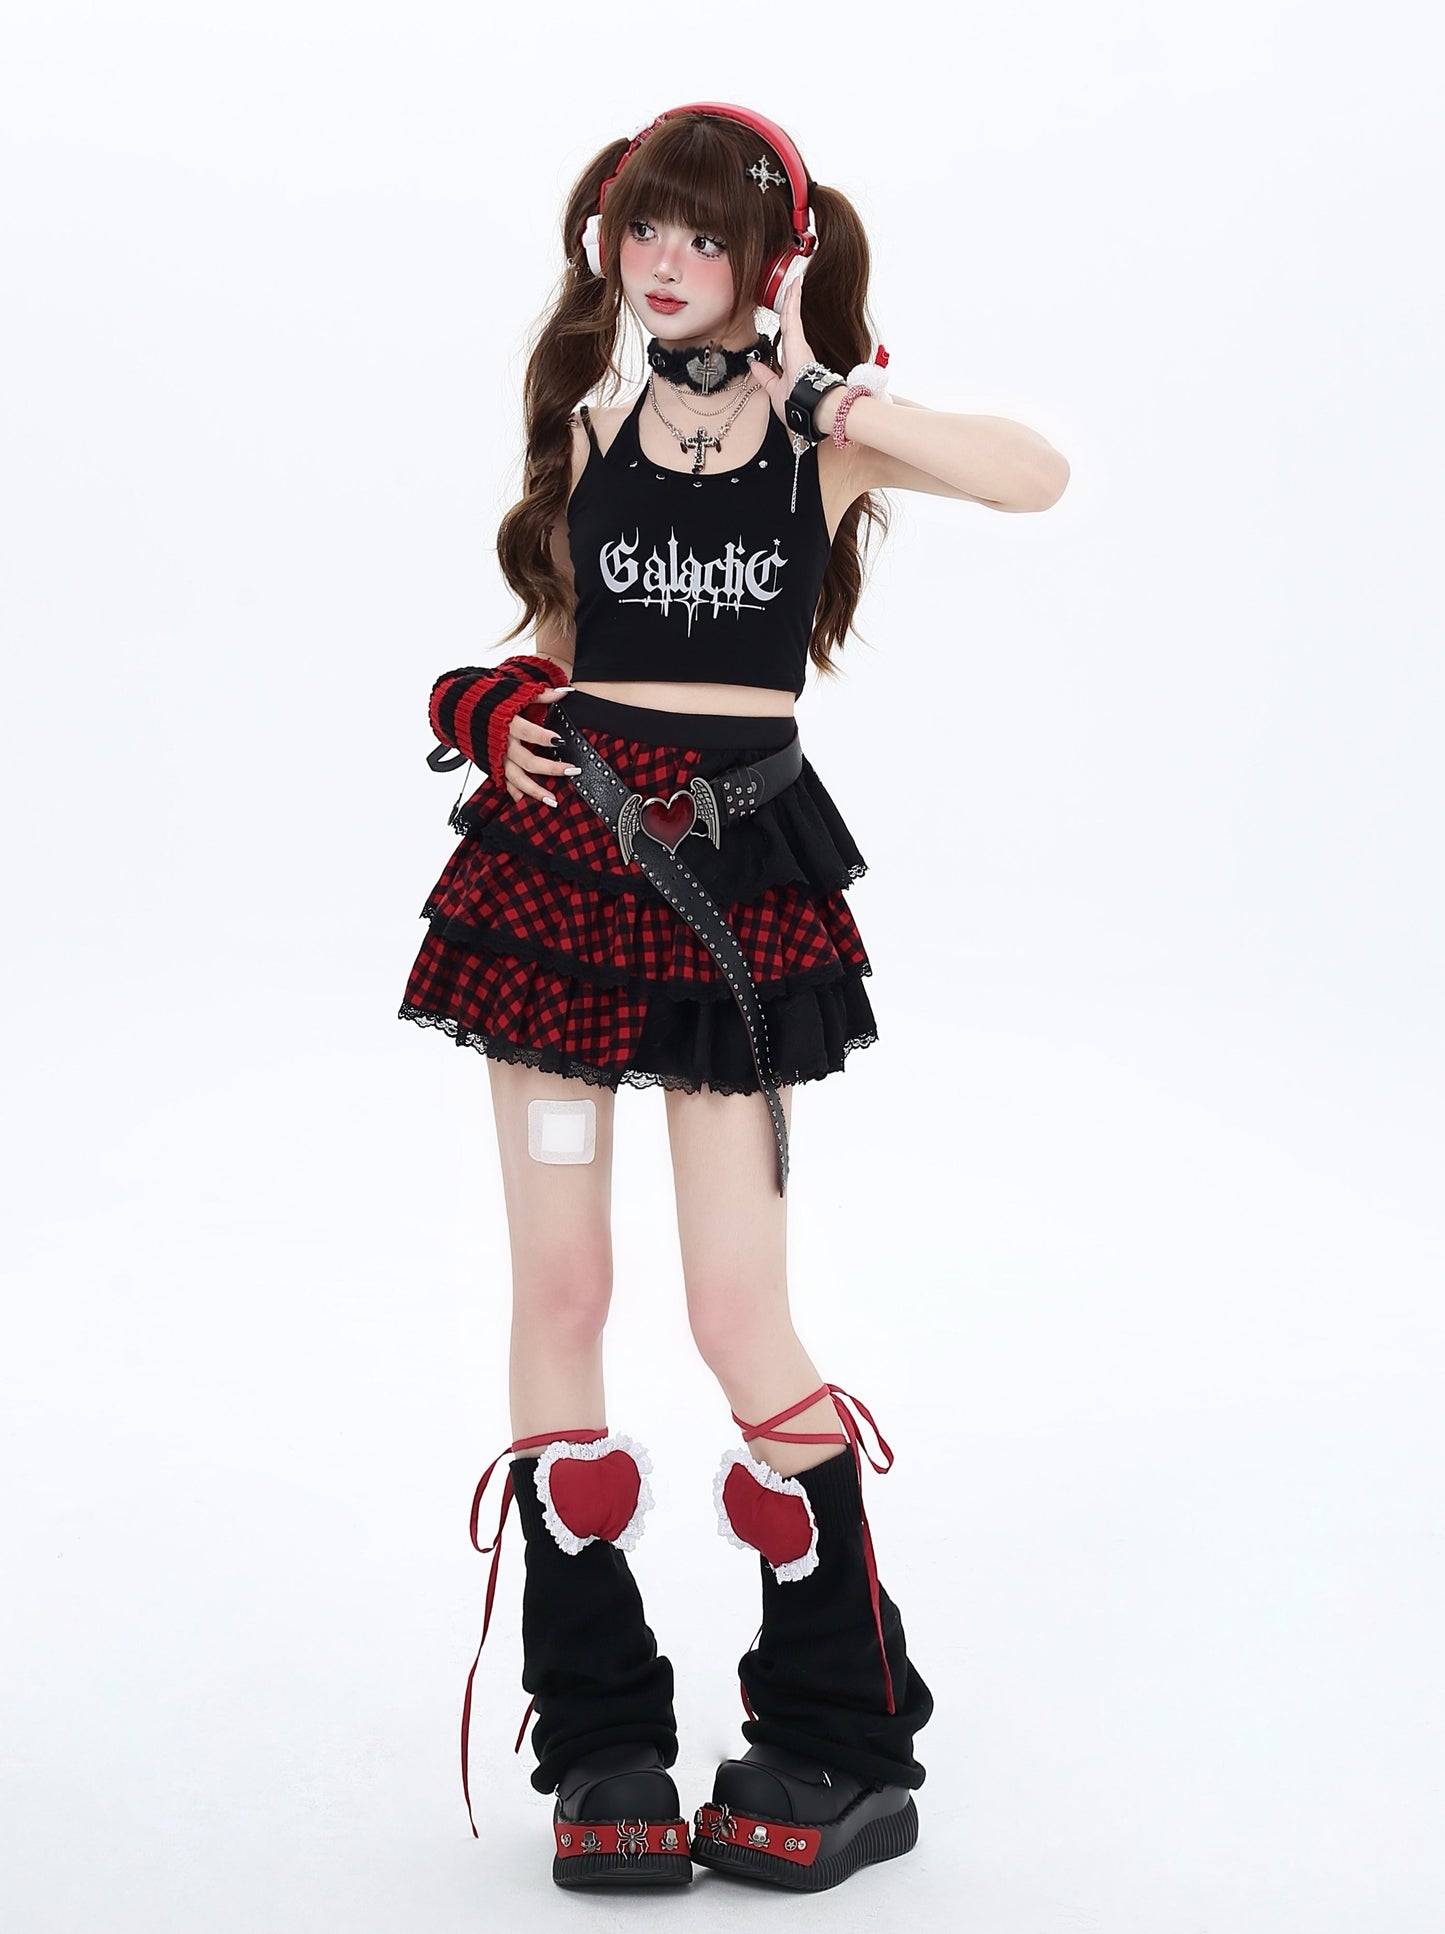 Crazy Girl Sweet Cool Subculture Check Skirt